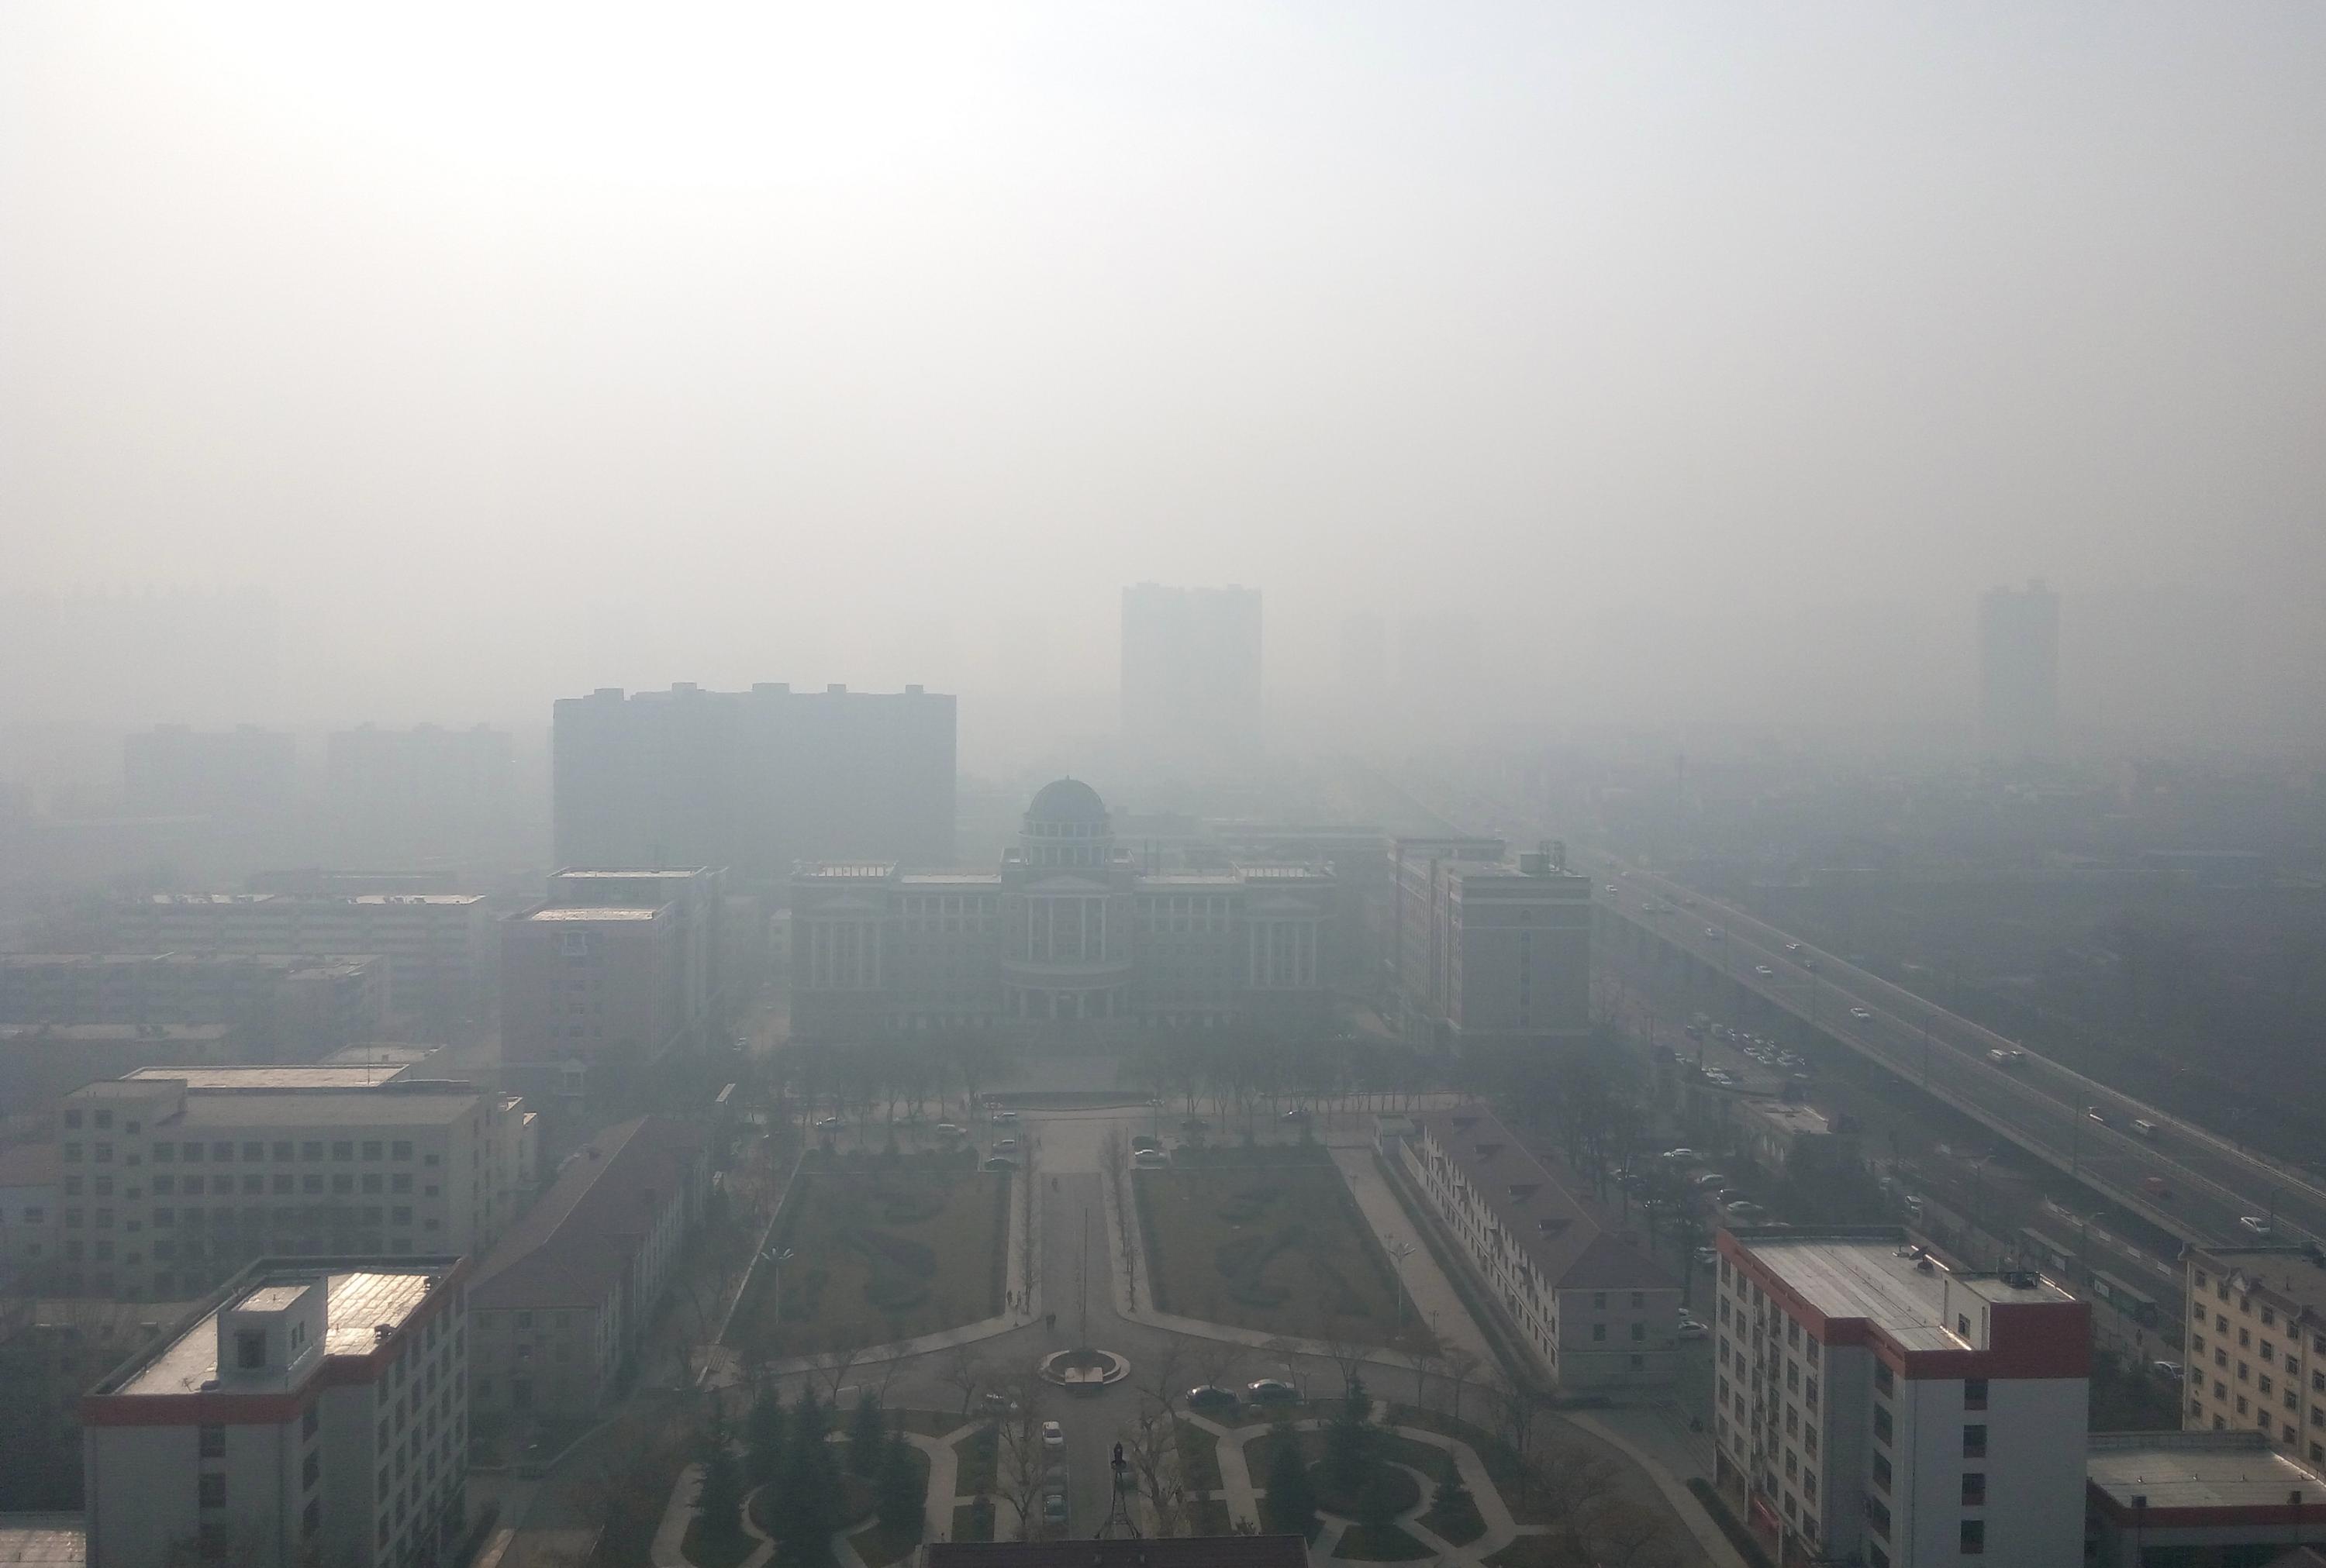 Photo taken in the city of Taiyuan, China shows haze on December 3, 2016. (Courtesy of Yuhang Wang)